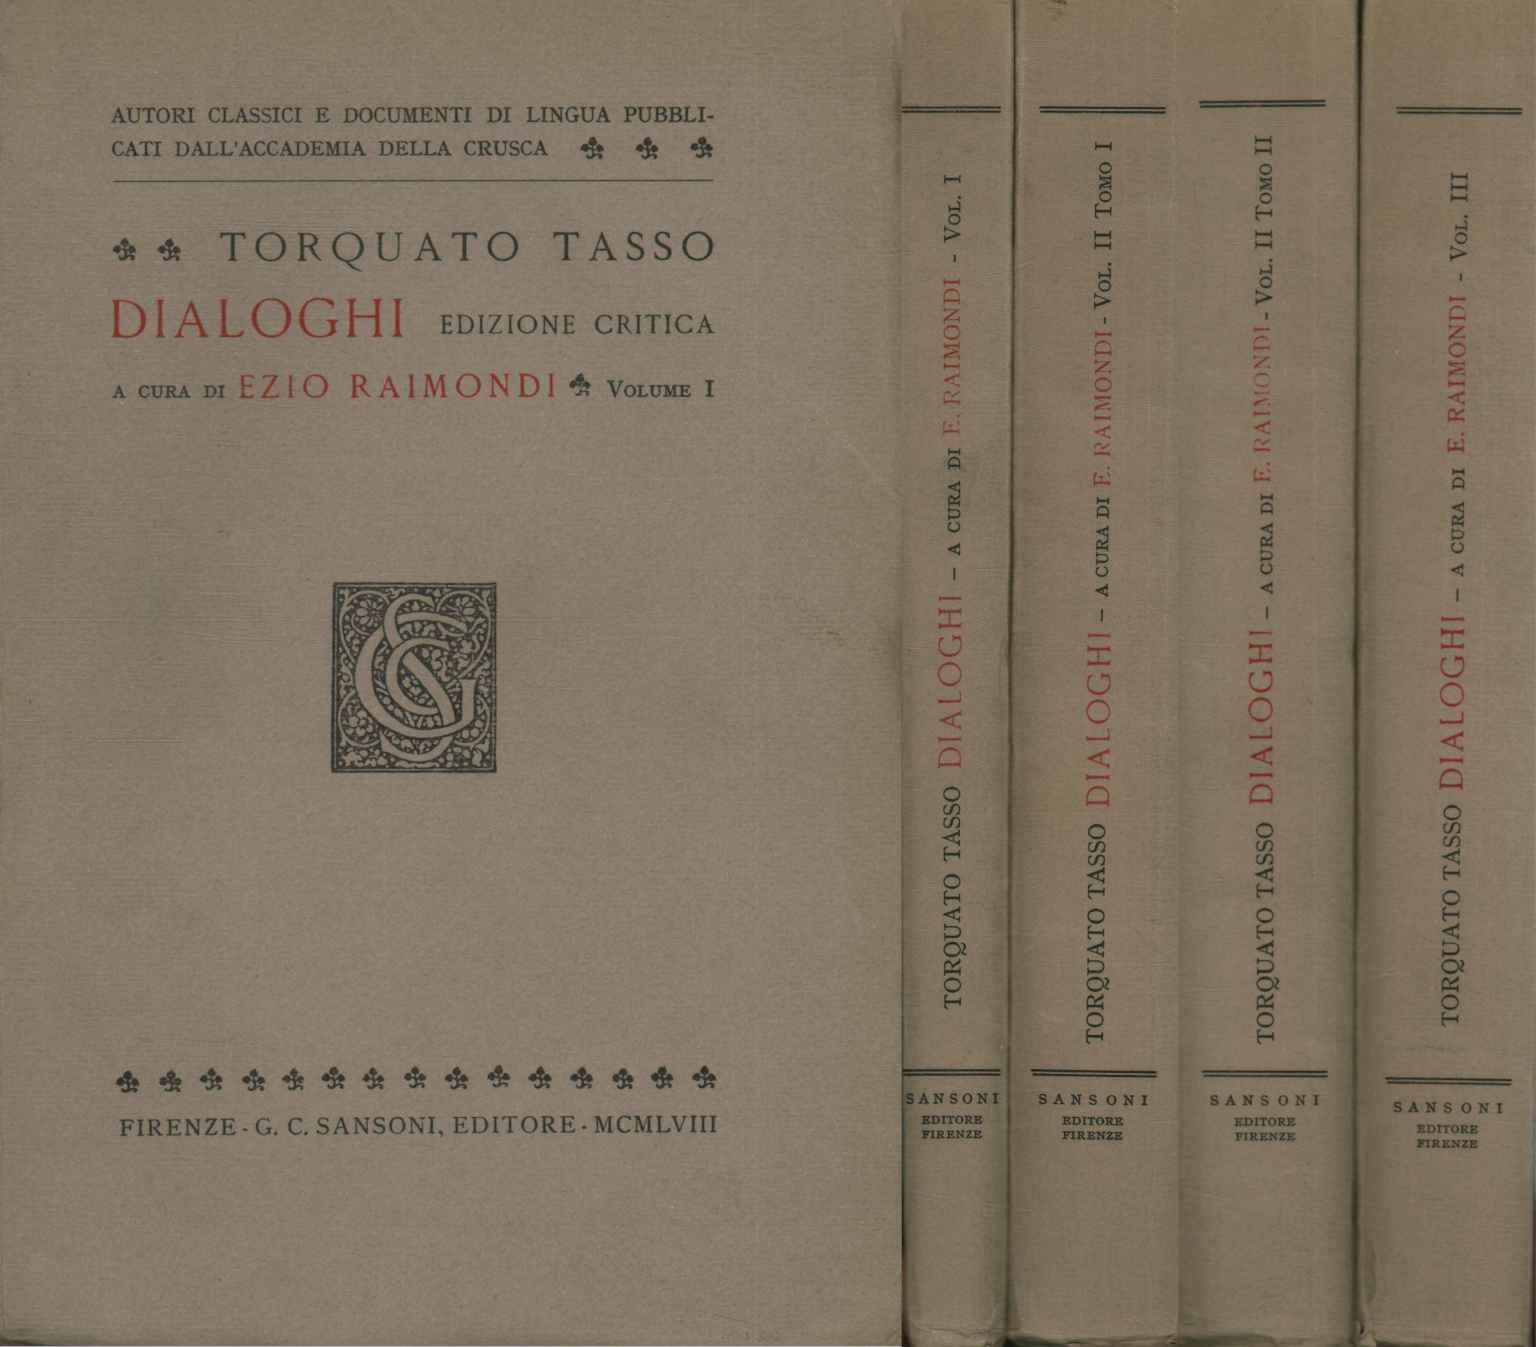 Dialogues (3 volumes; 4 tomes), Dialogues. Édition critique (3 Volumes. 4%,Dialogues. Édition critique (3 Volumes. 4%,Dialogues. Édition critique (3 Volumes. 4%